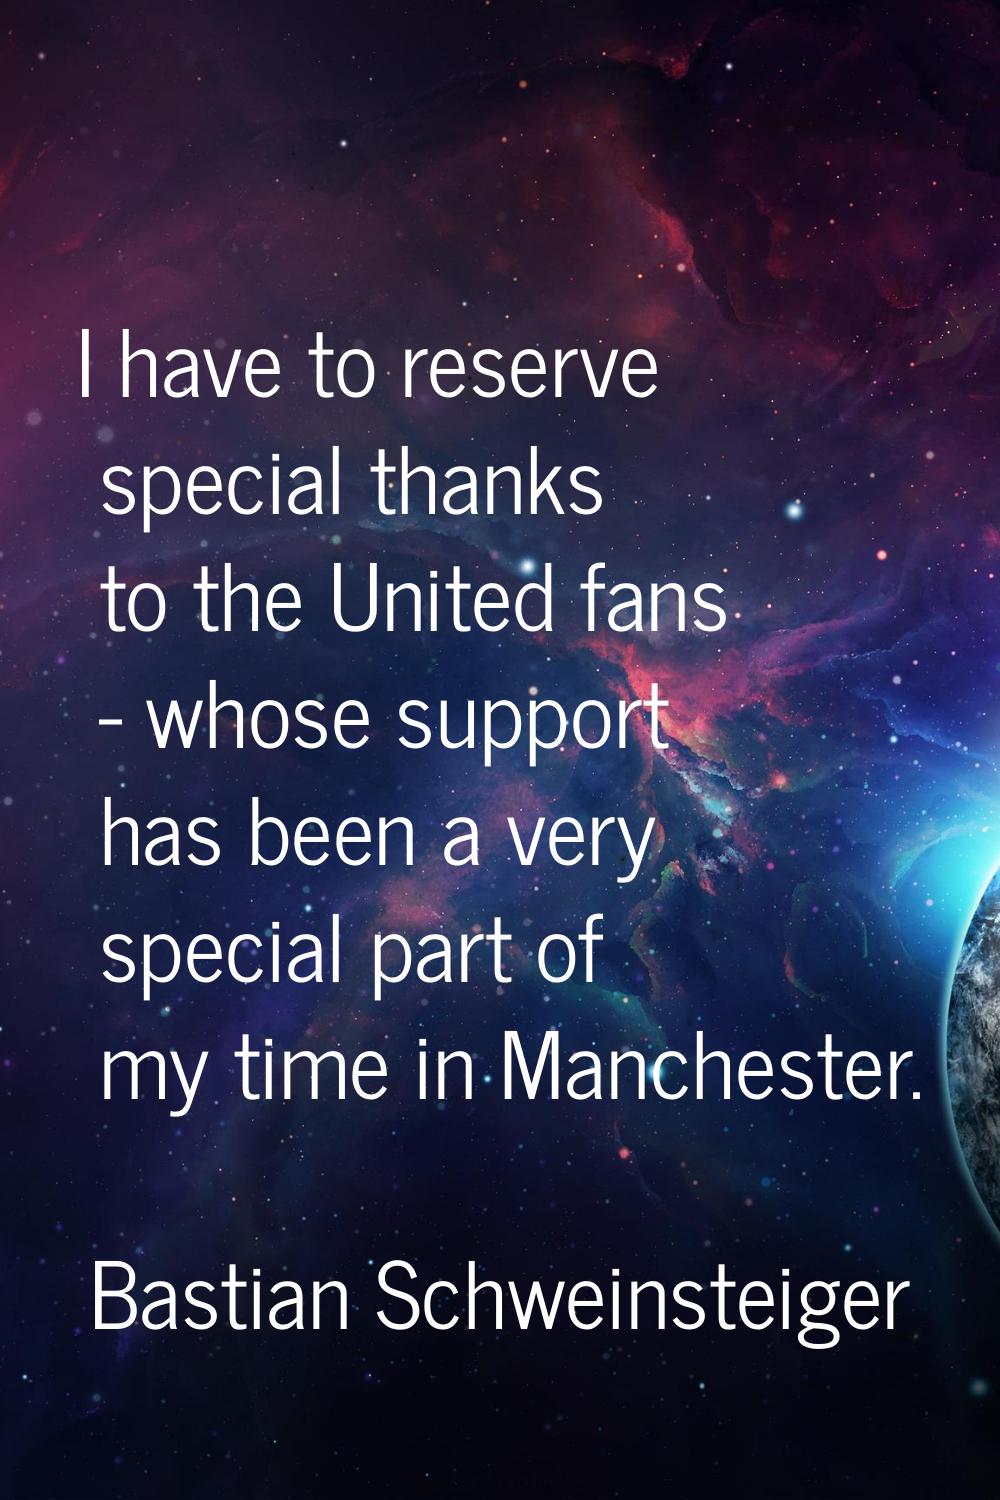 I have to reserve special thanks to the United fans - whose support has been a very special part of